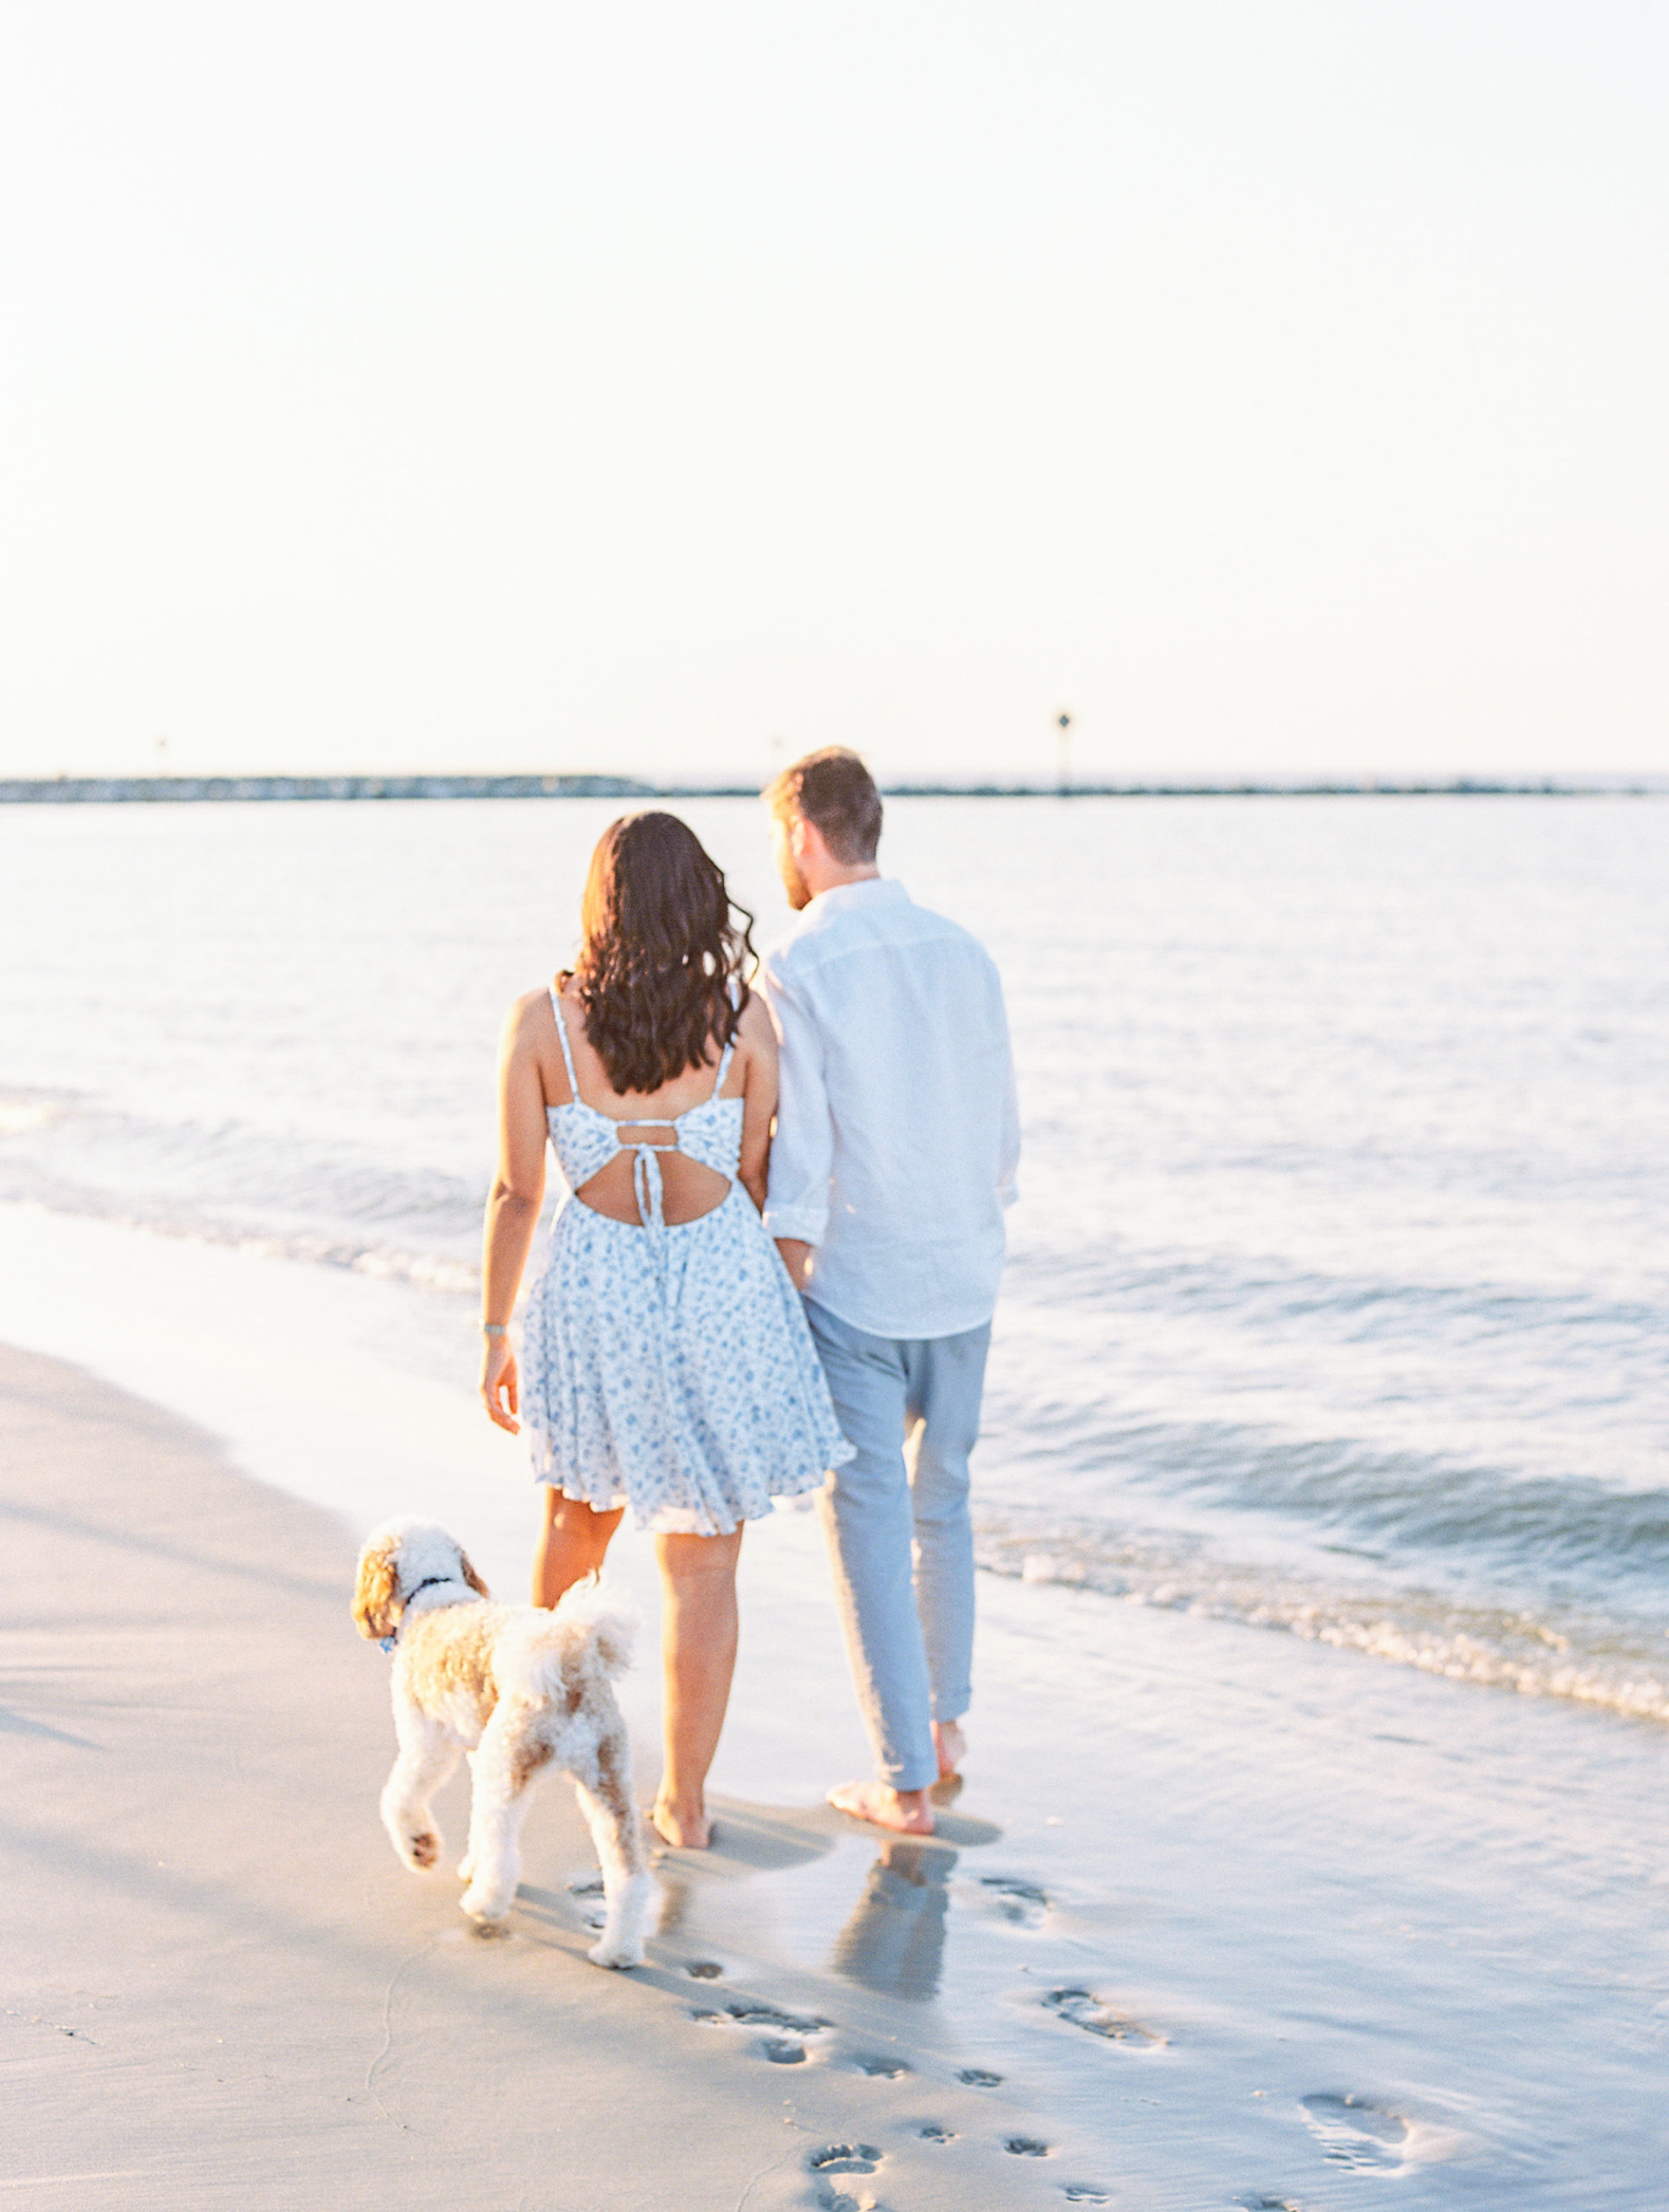 Couple walking along the beach at sunset with their dog